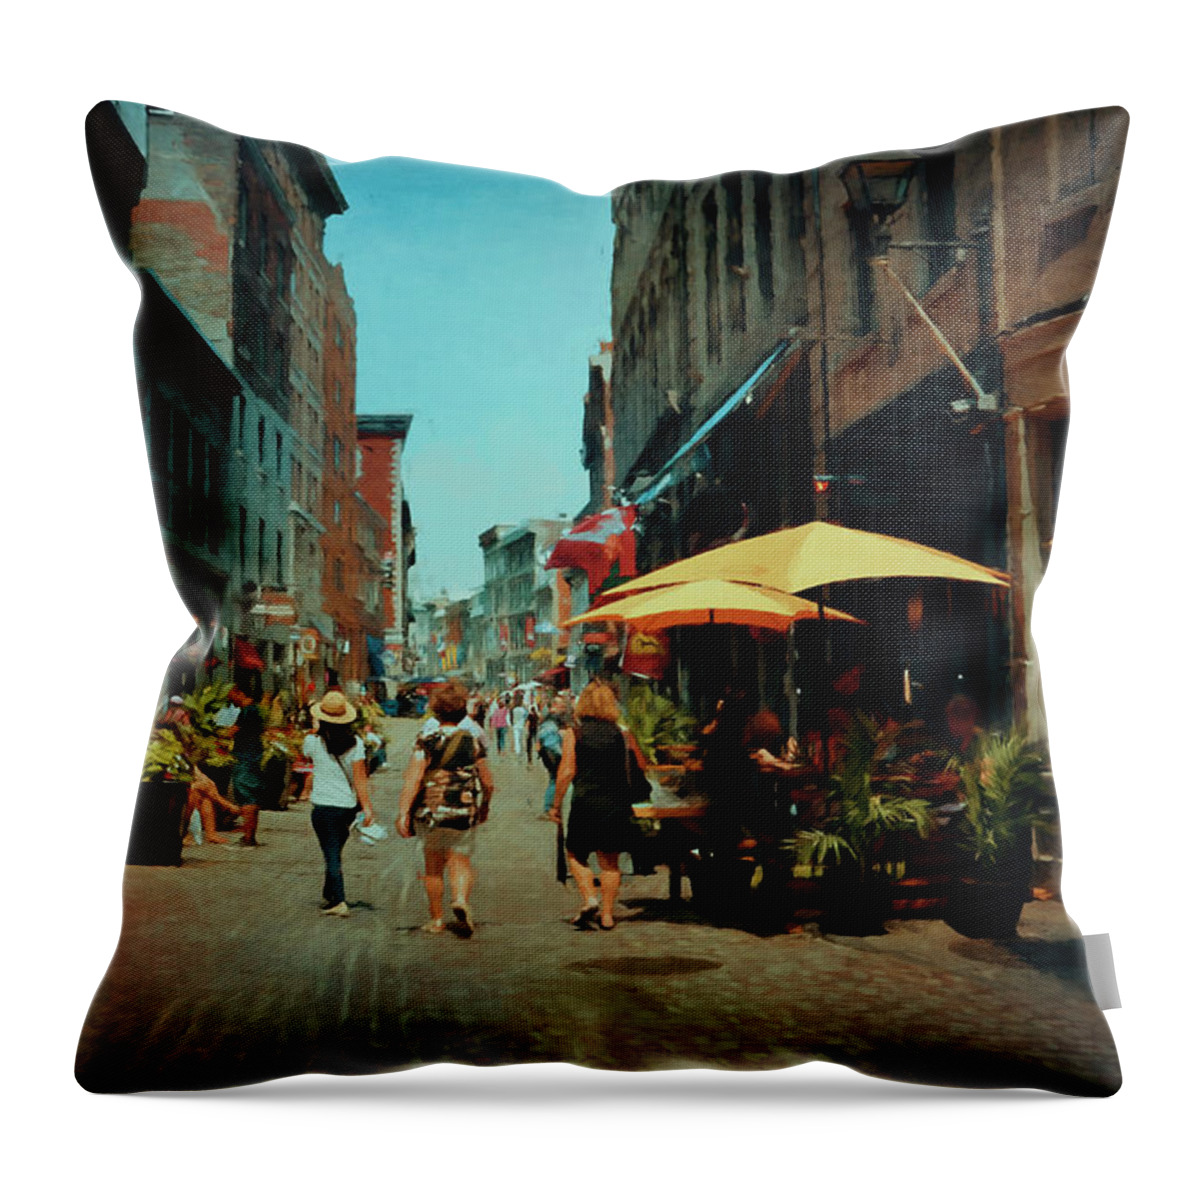 Montreal Throw Pillow featuring the photograph Old Montreal - Quebec by Maria Angelica Maira